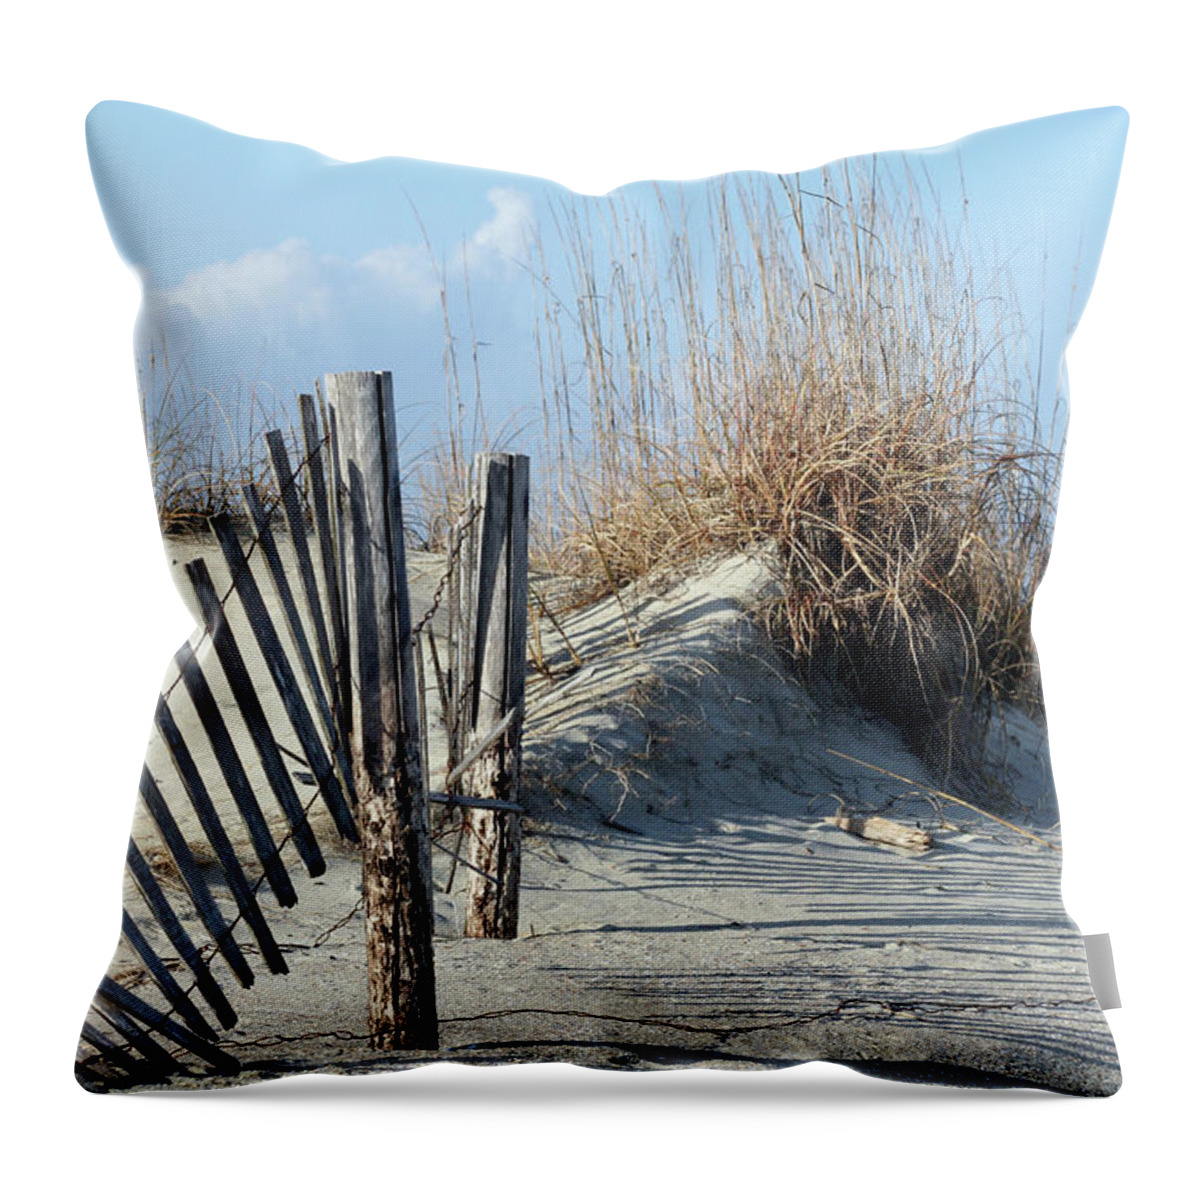 Tybee Island Throw Pillow featuring the photograph Fence in Dunes by Darryl Brooks